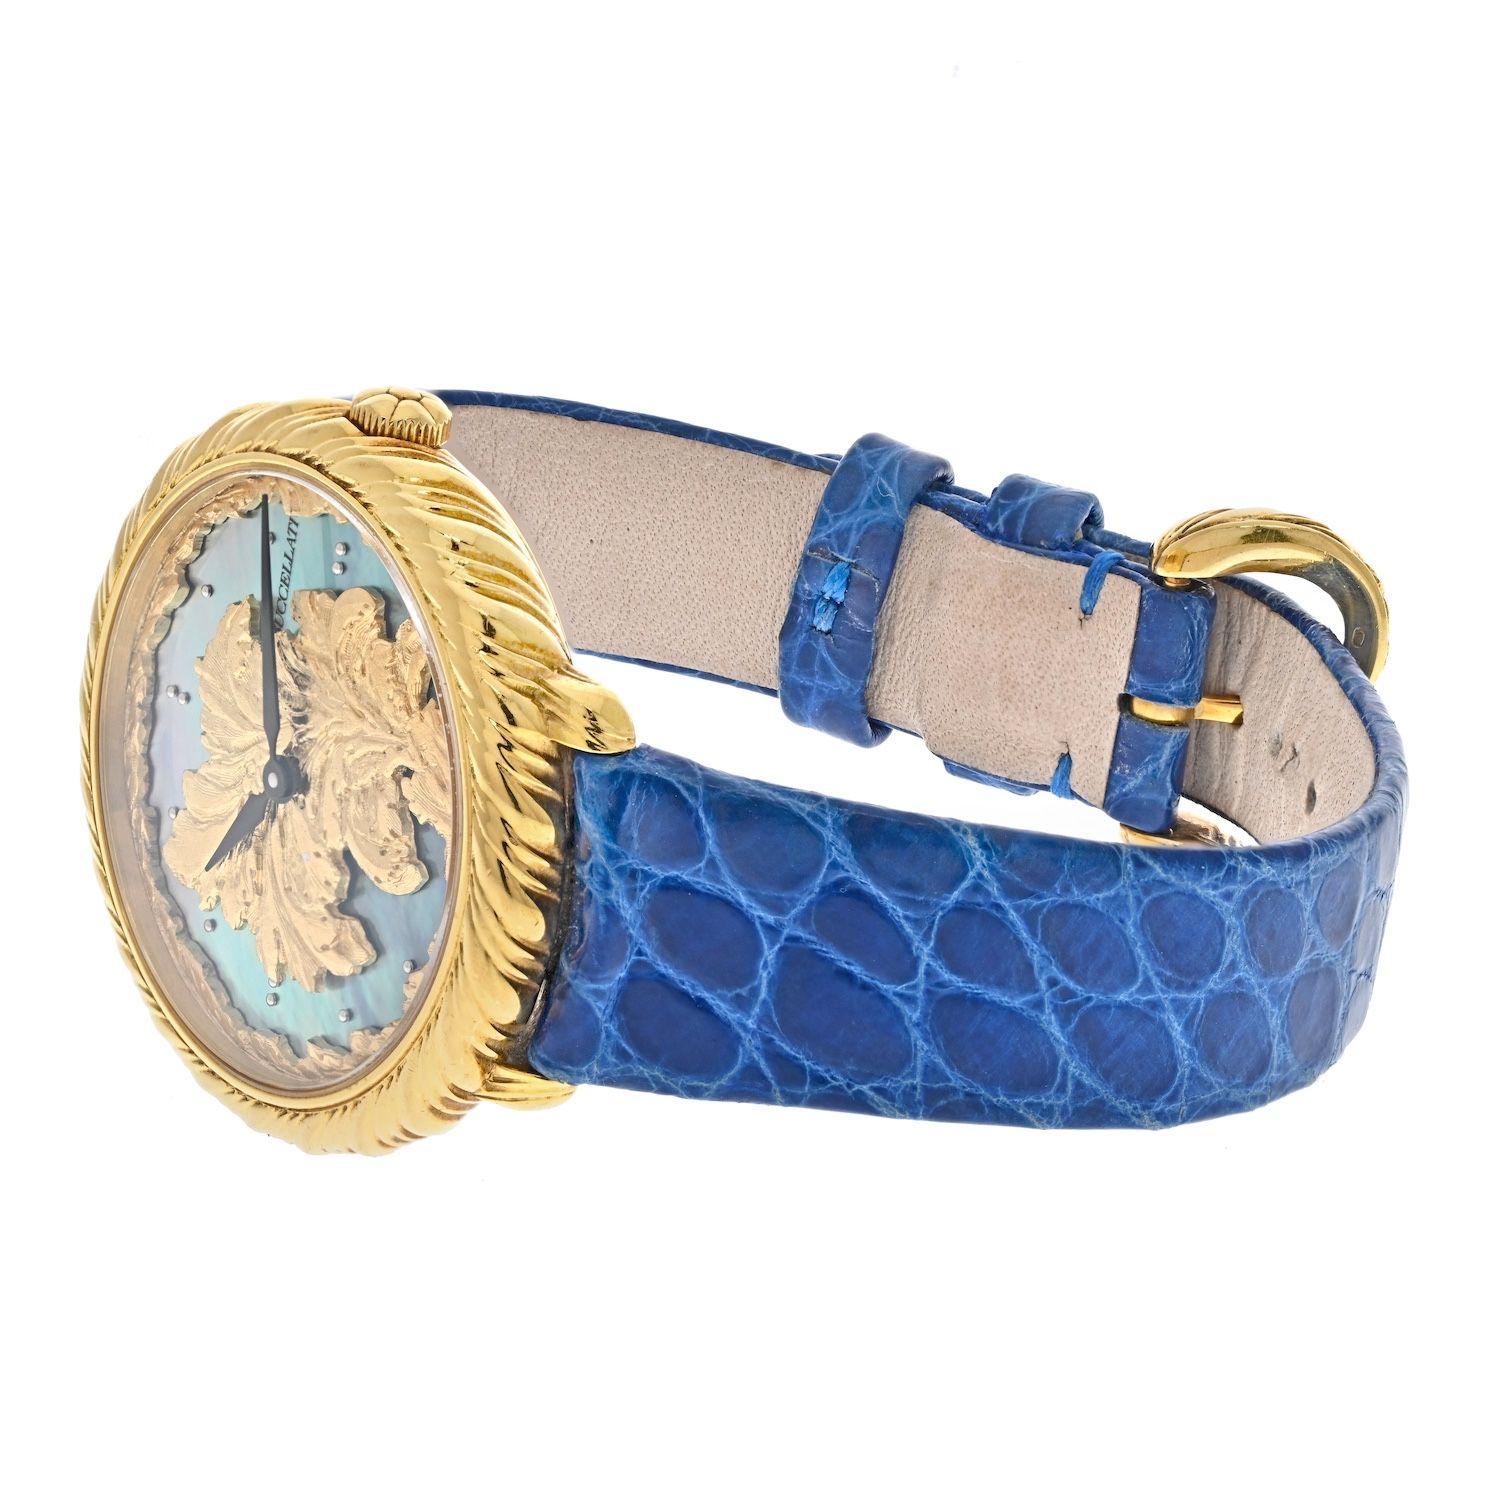 This rare Audachron is comprised of an 18 karat yellow gold case and clasp attached to a sky blue leather strap. This beautiful ladies Buccellati Audachron watch has a quartz movement and mother of pearl dial. The case width is 34mm. 
Reference